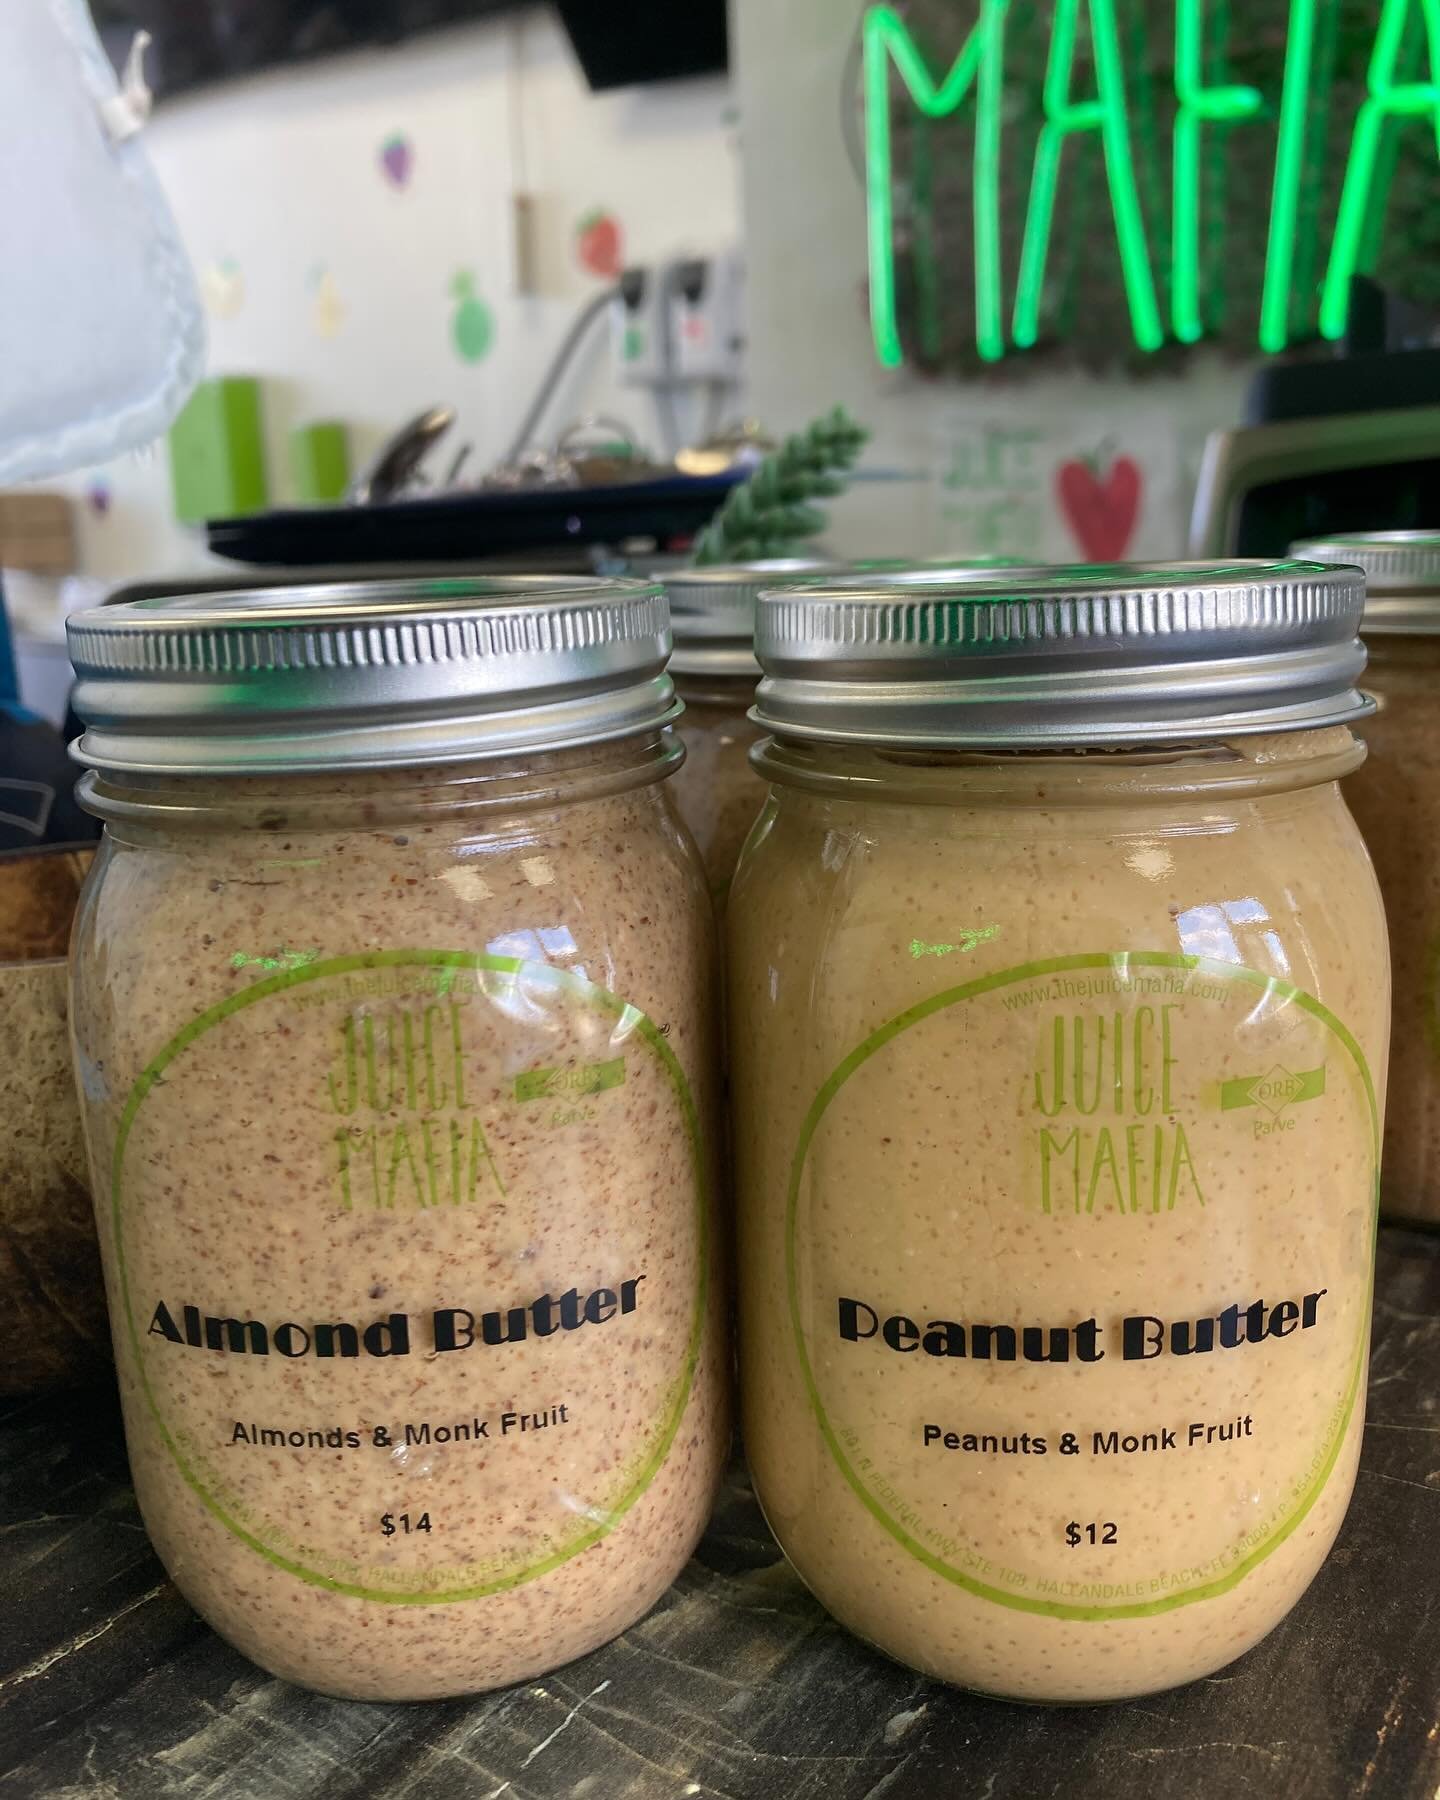 What do you prefer? #peanutbutter or #almondbutter?

Both of them are made weekly at Juice Mafia using just nuts and a little monk fruit to give it a hint of sweetness. You&rsquo;re going to go nuts when you taste it! 🥜

Some of the benefits of all 